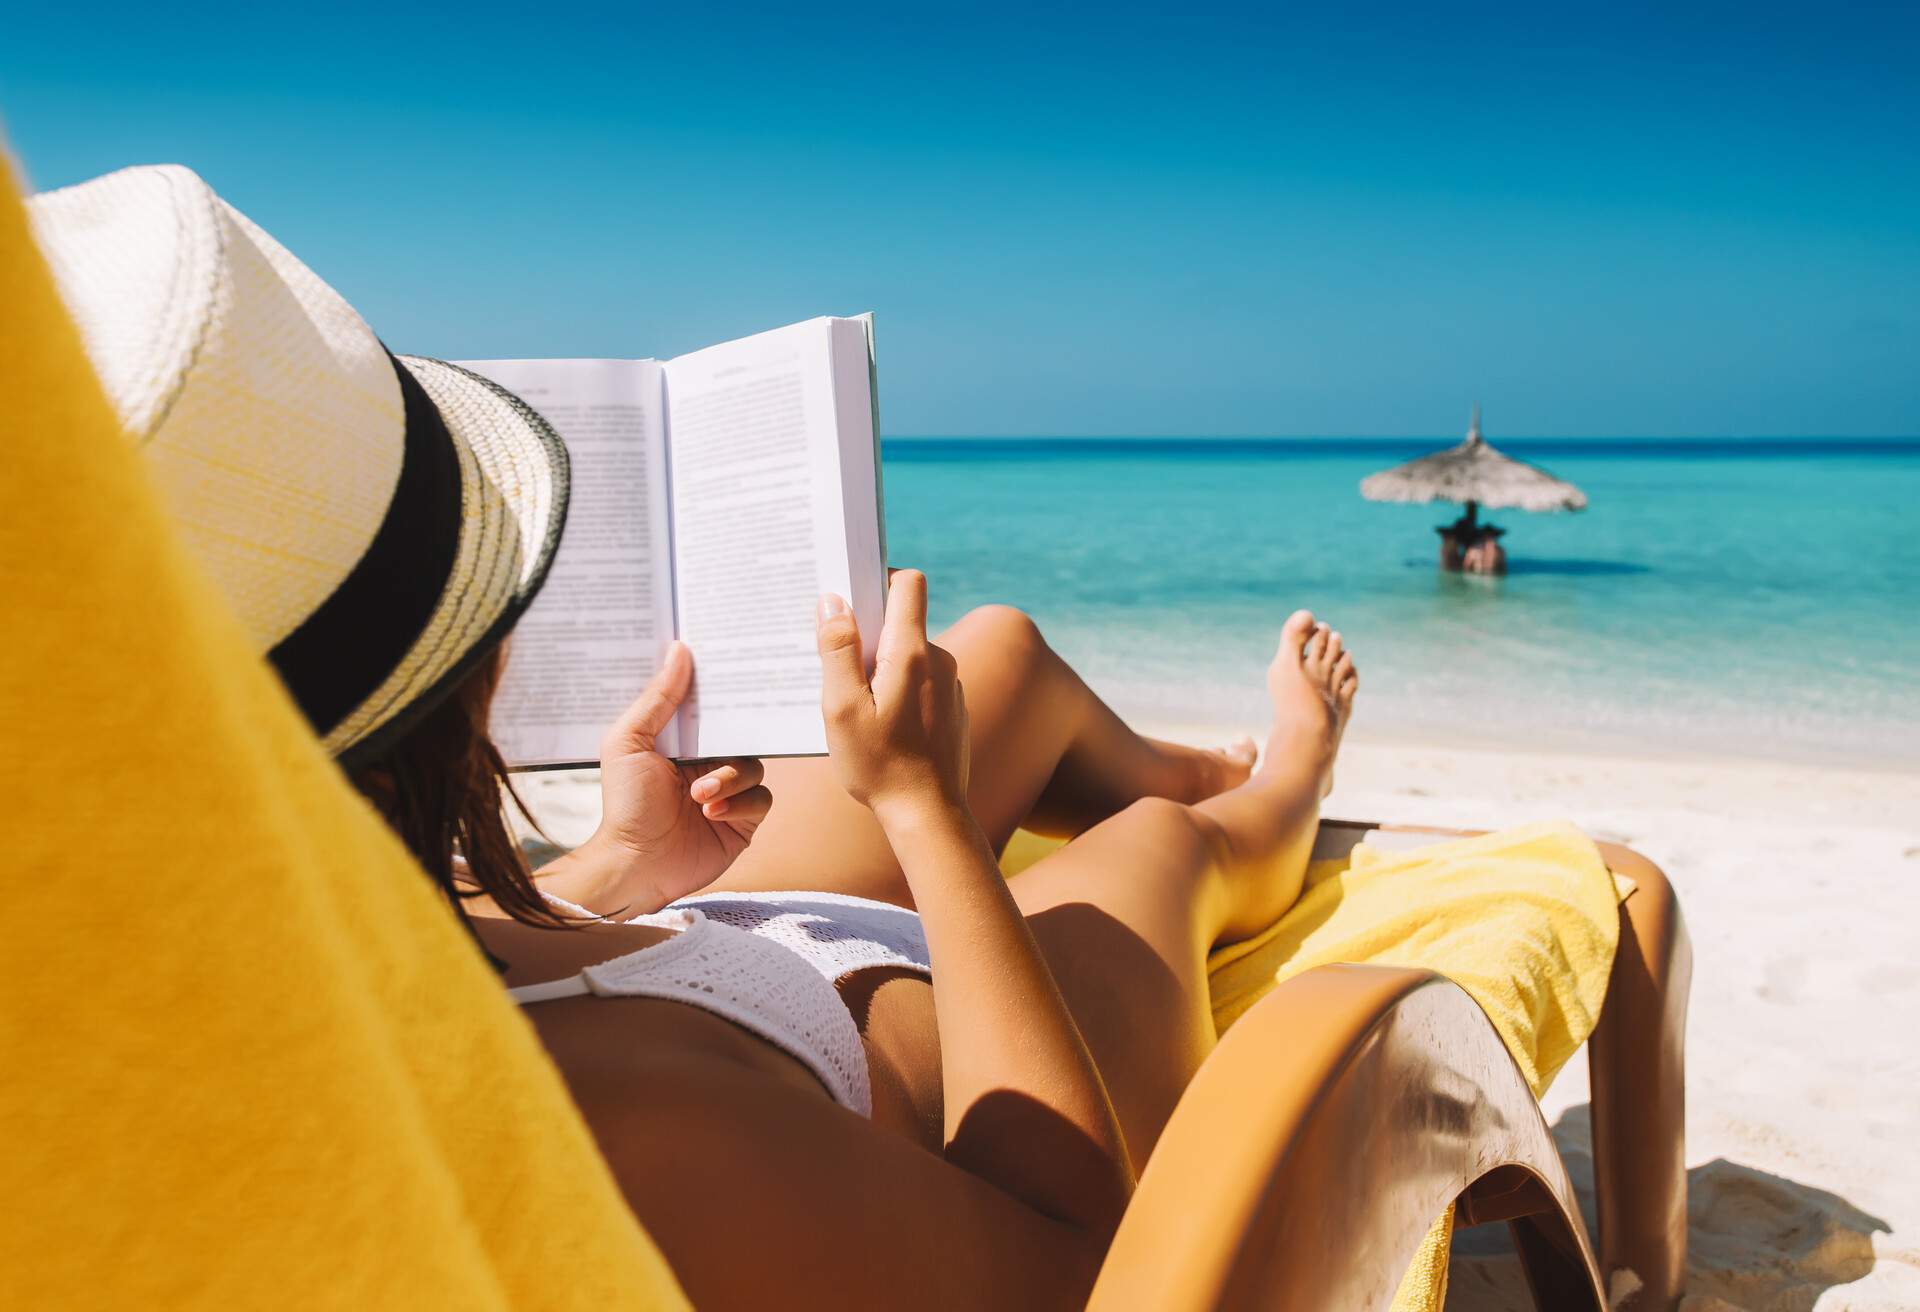 THEME_PEOPLE_BOOK_READING_BEACH_TRAVEL_VACATION-GettyImages-664474198